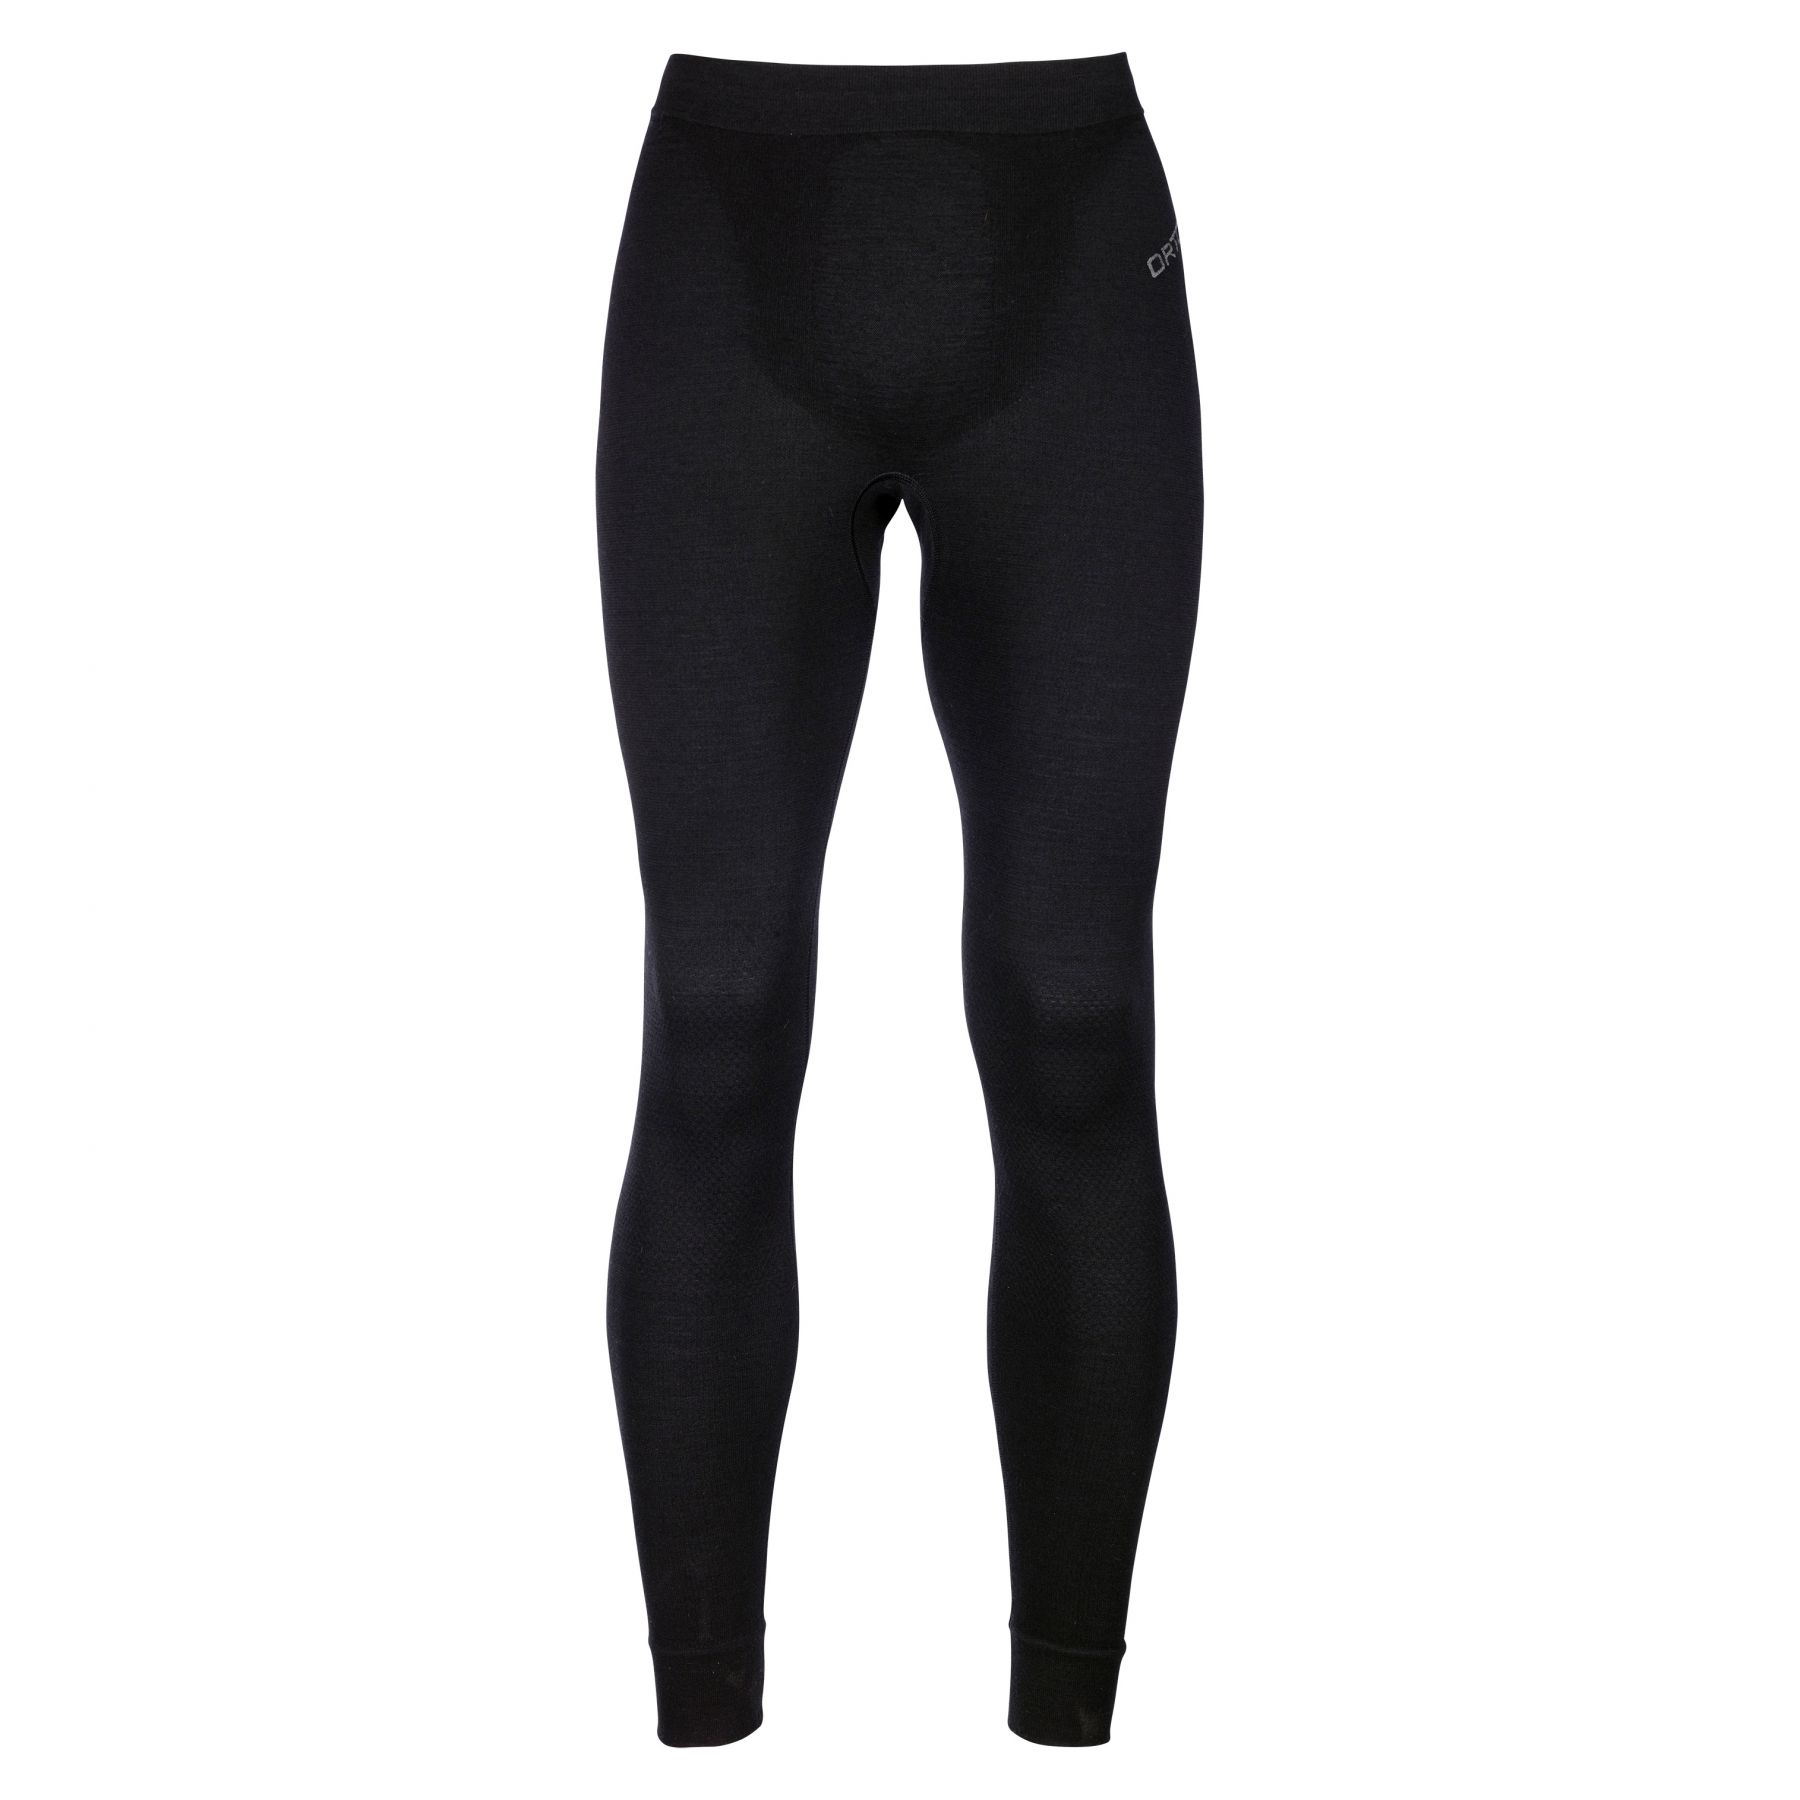 Ortovox 230 Competition Long Pants miesten musta